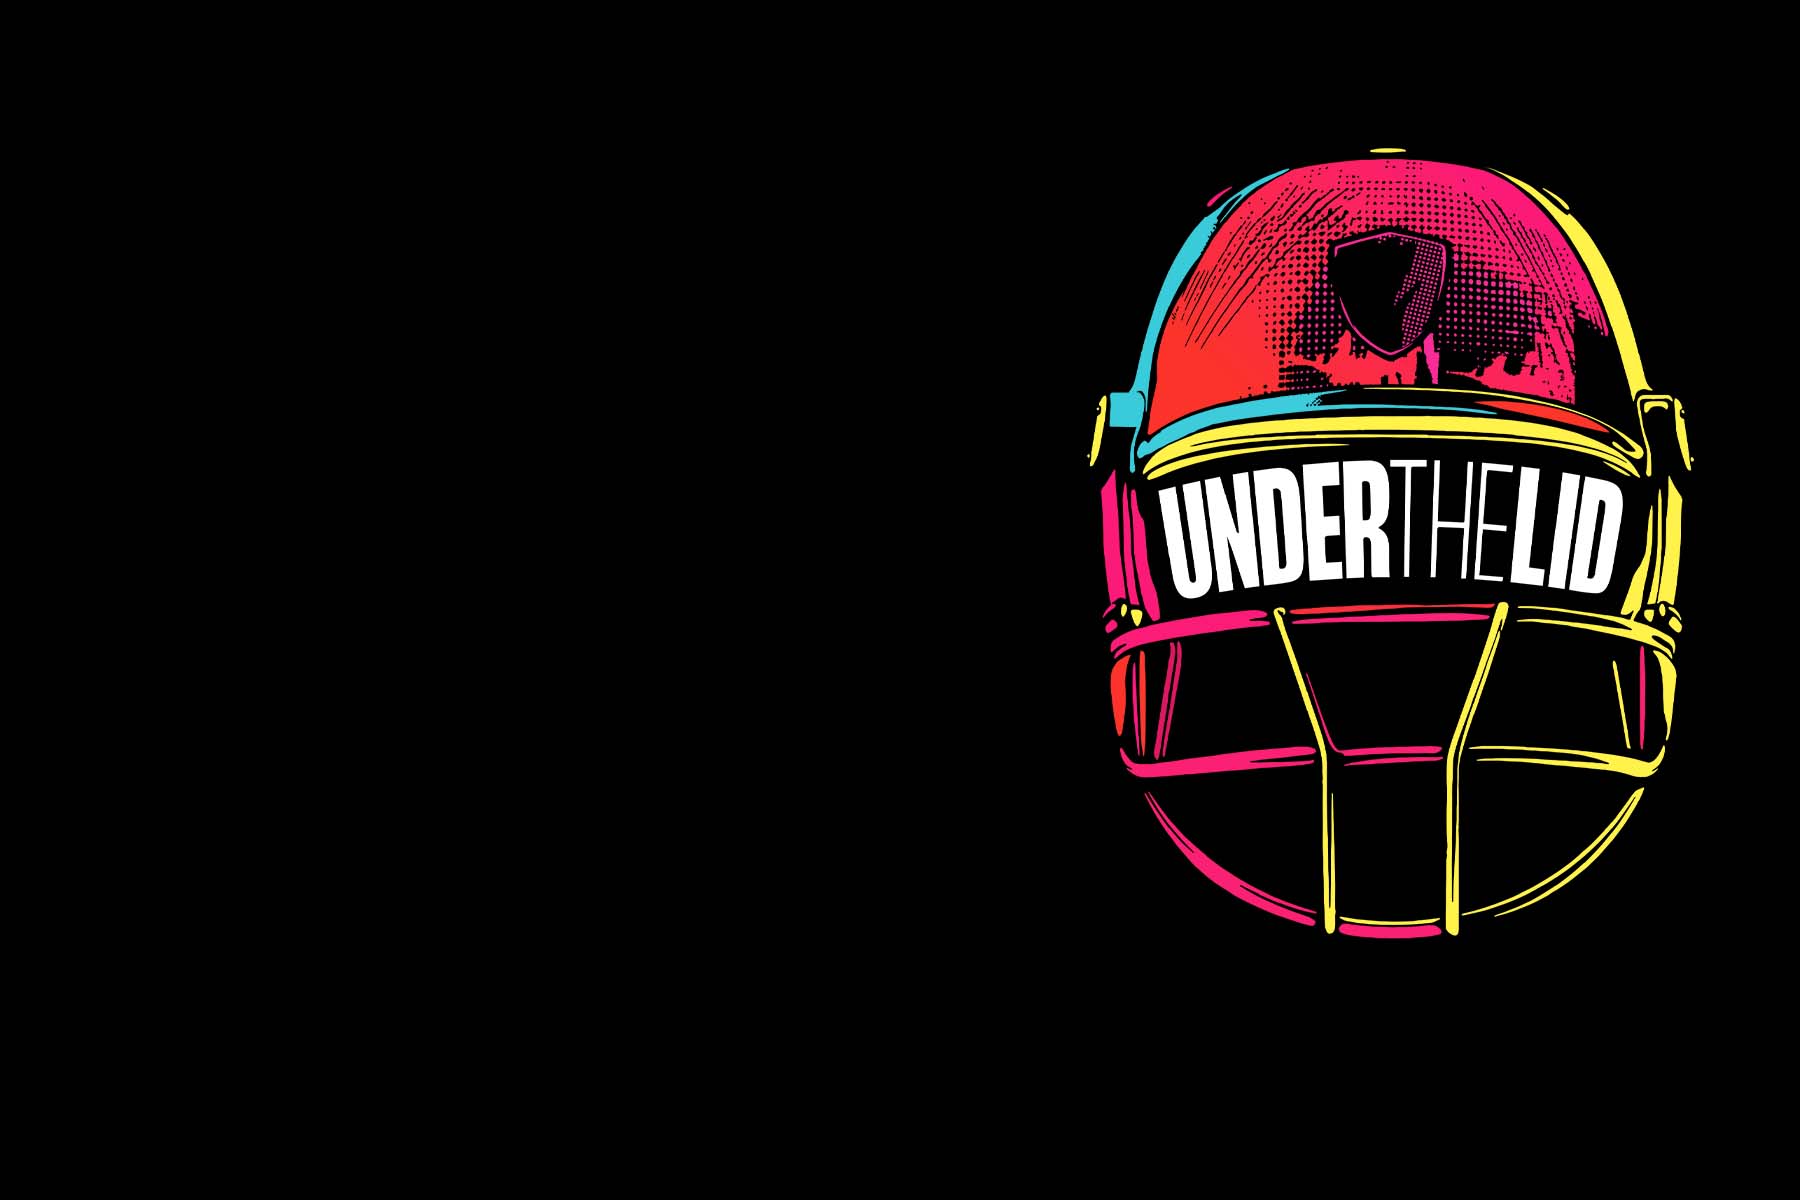 Under The Lid launches with England star